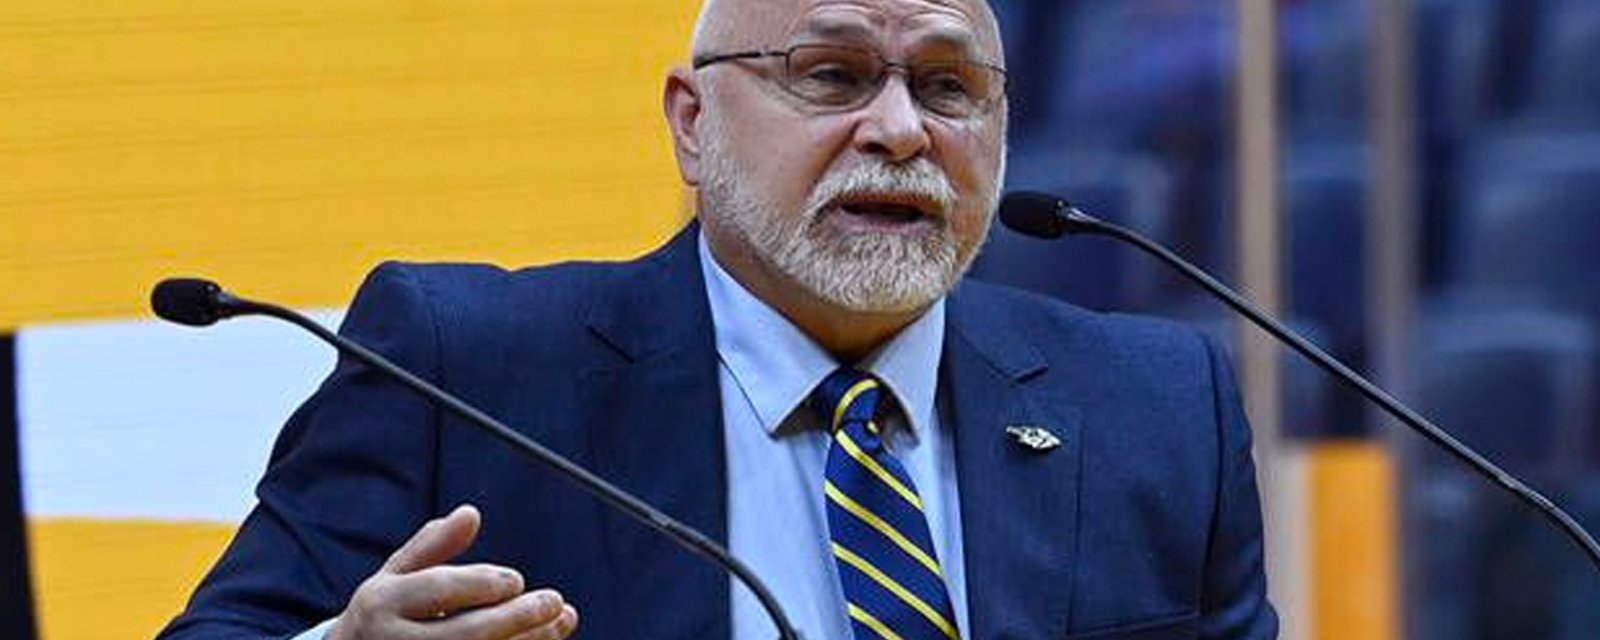 Barry Trotz makes his first move as Preds GM and fans are not happy